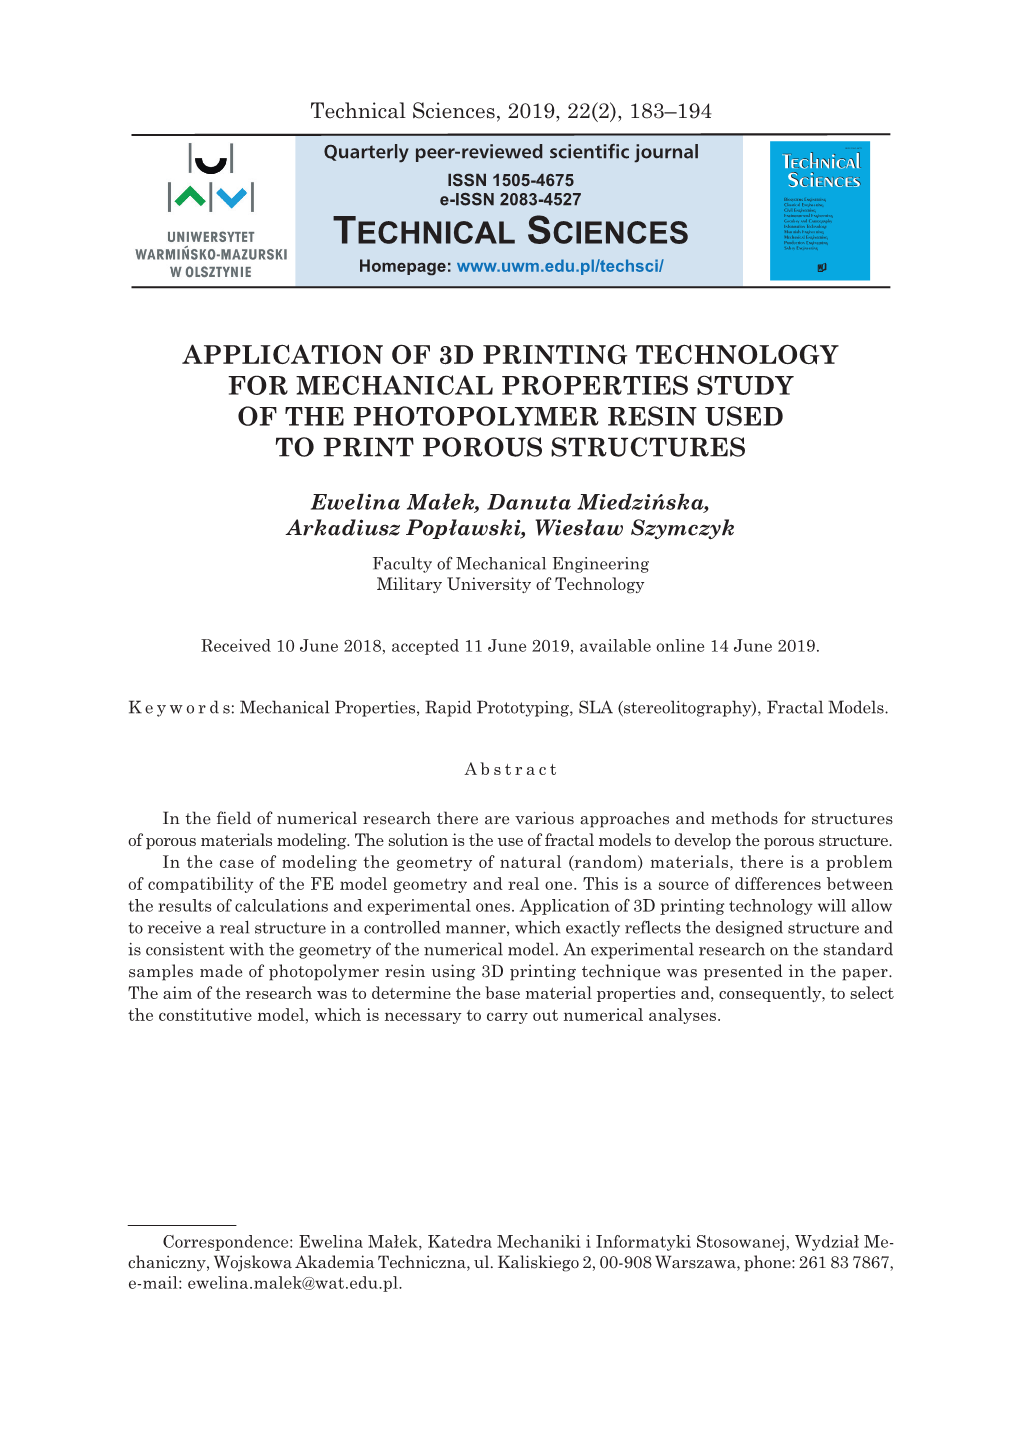 Application of 3D Printing Technology for Mechanical Properties Study of the Photopolymer Resin Used to Print Porous Structures